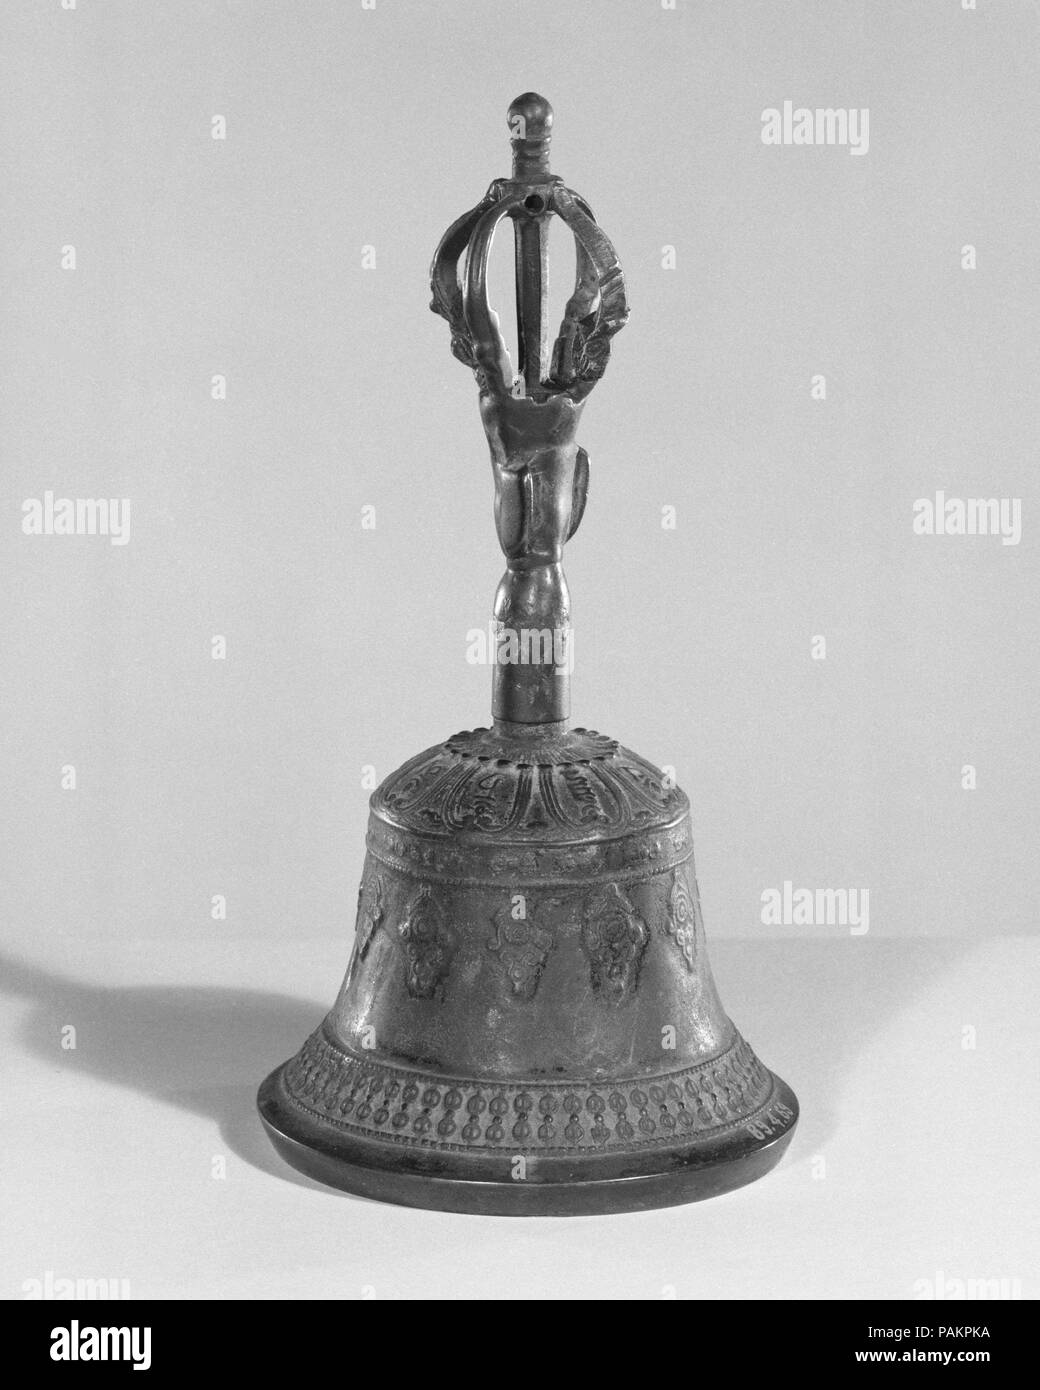 Dril-bu. Culture: Tibetan. Dimensions: H.: 20.3 cm (8 in.); Diam.; 9.5 cm (3-3/4 in.). Date: late 19th century.  The dril-bu (bell) along with the dorje (scepter) are indispensable liturgical instruments used during Buddhist ritual recitation. They are usually regarded as one object, are matched and used together. The bell is held in the left hand and the scepter in the right as both hands gracefully move in prescribed gestures that serve as a commentary to the recitation. As a pair, they reflect the two aspects of Buddhist practice: method and wisdom, intuition and compassion. The prongs emer Stock Photo